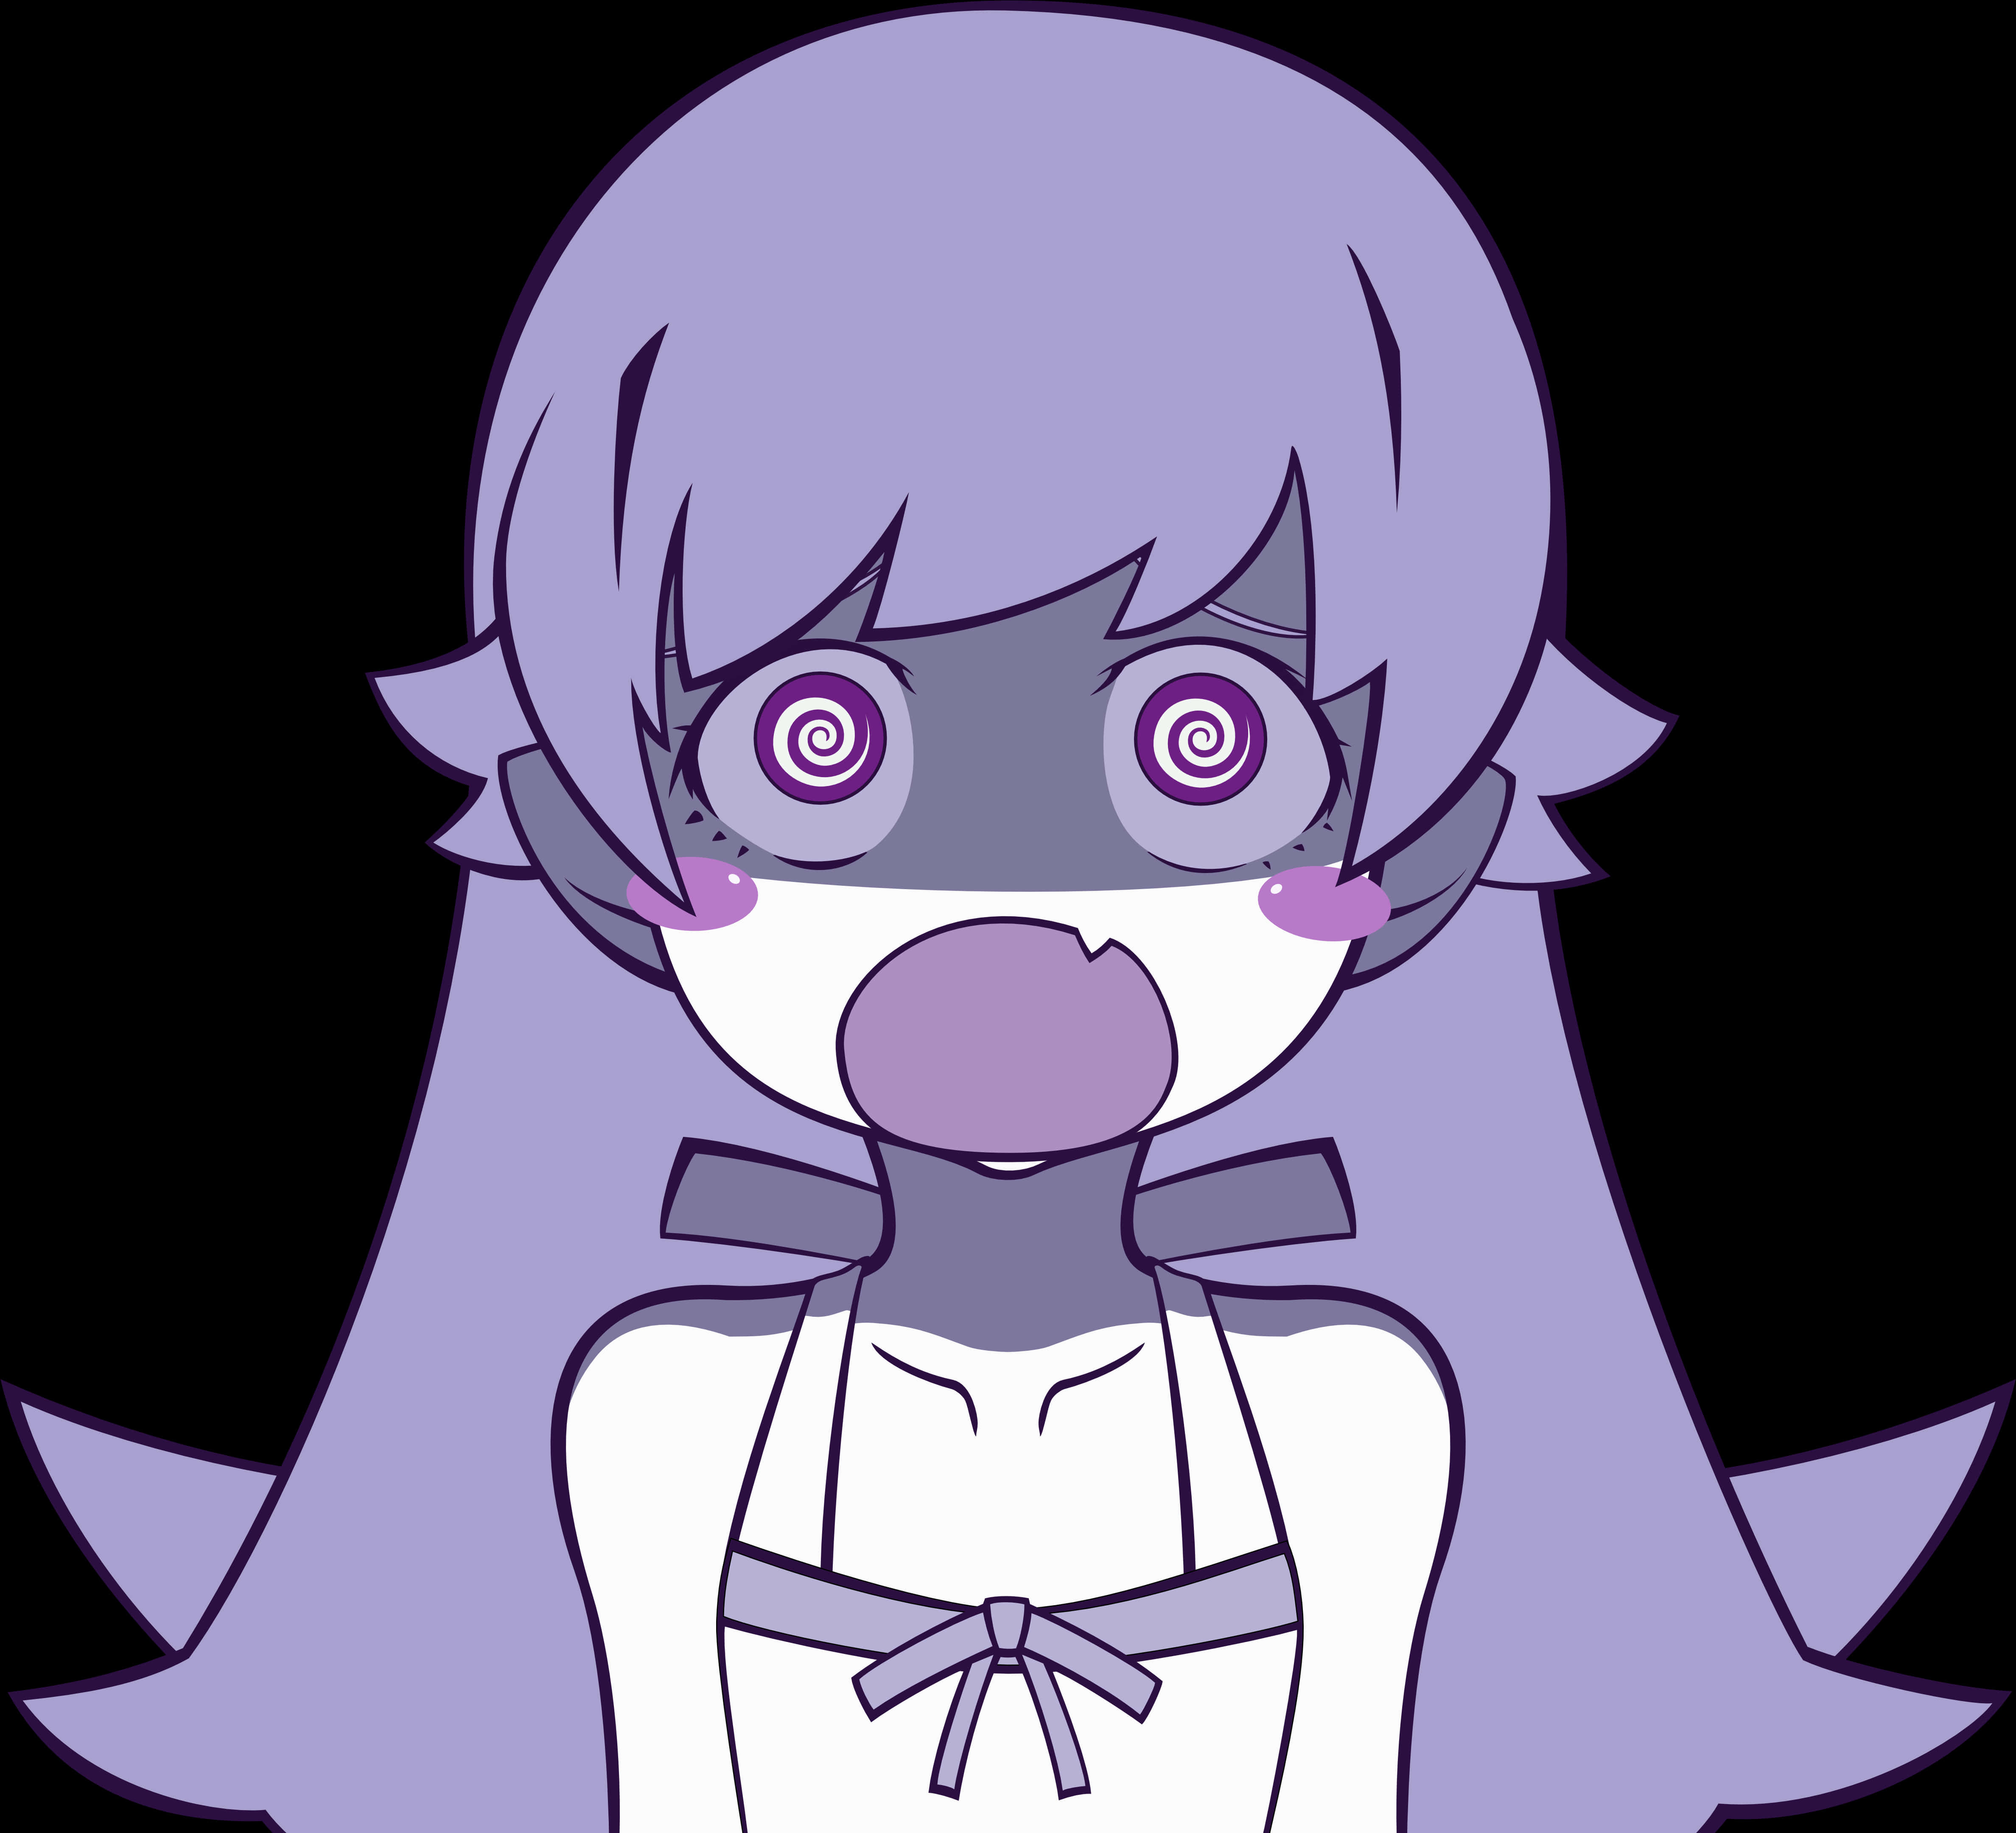 A Cartoon Of A Girl With Purple Hair And Purple Eyes